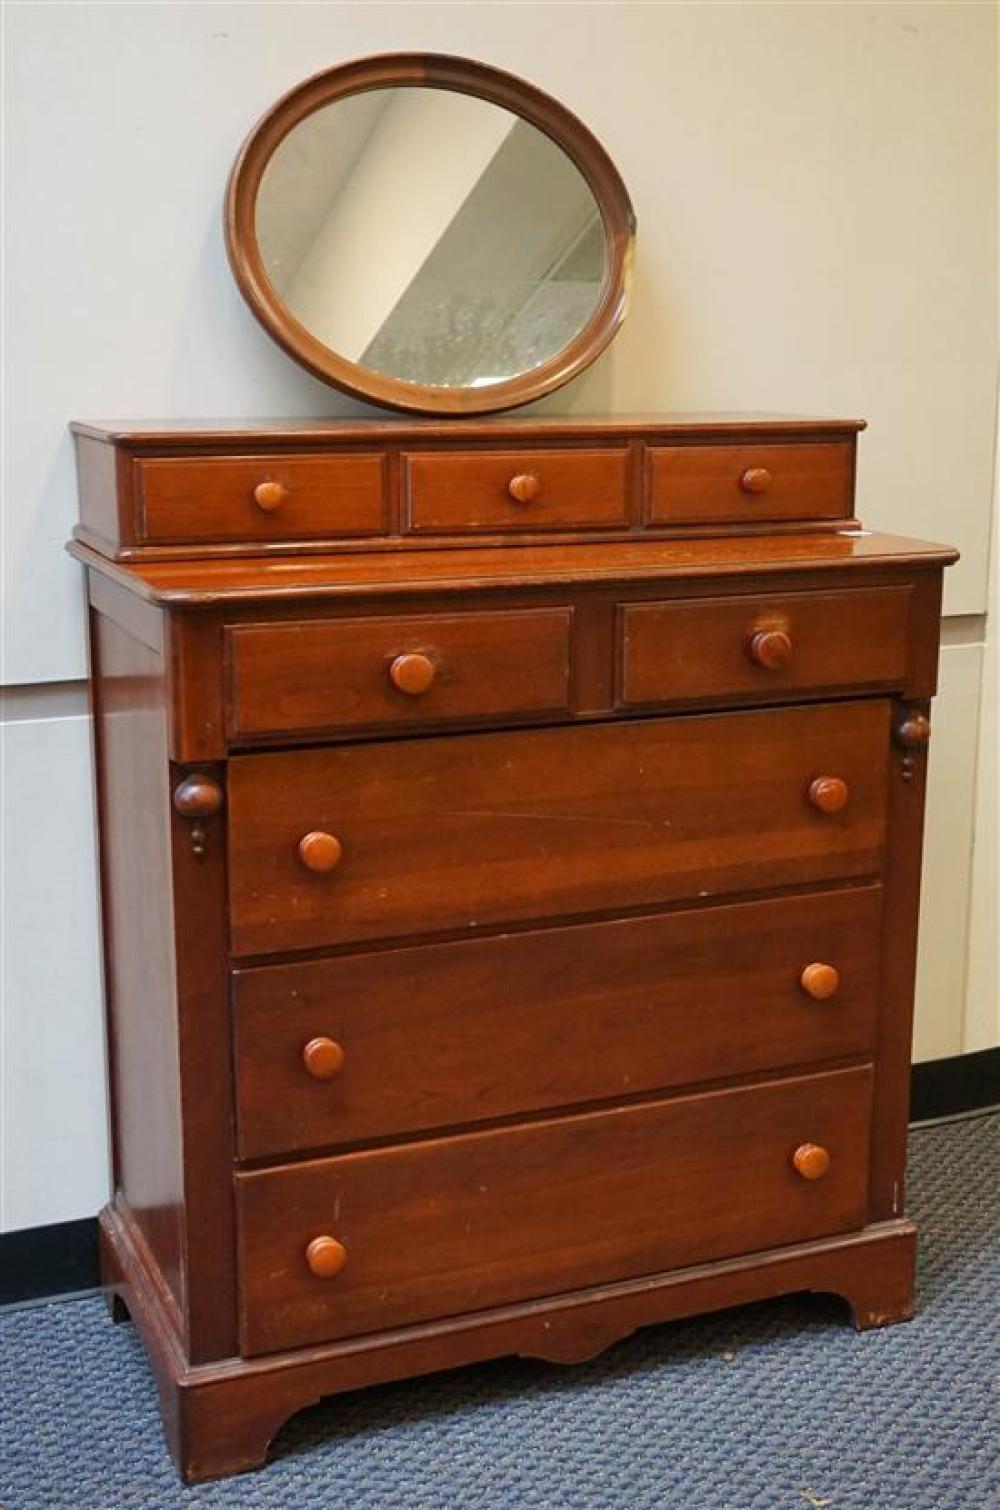 MOUNT VERNON CHERRY CHEST OF DRAWERS 3208a0